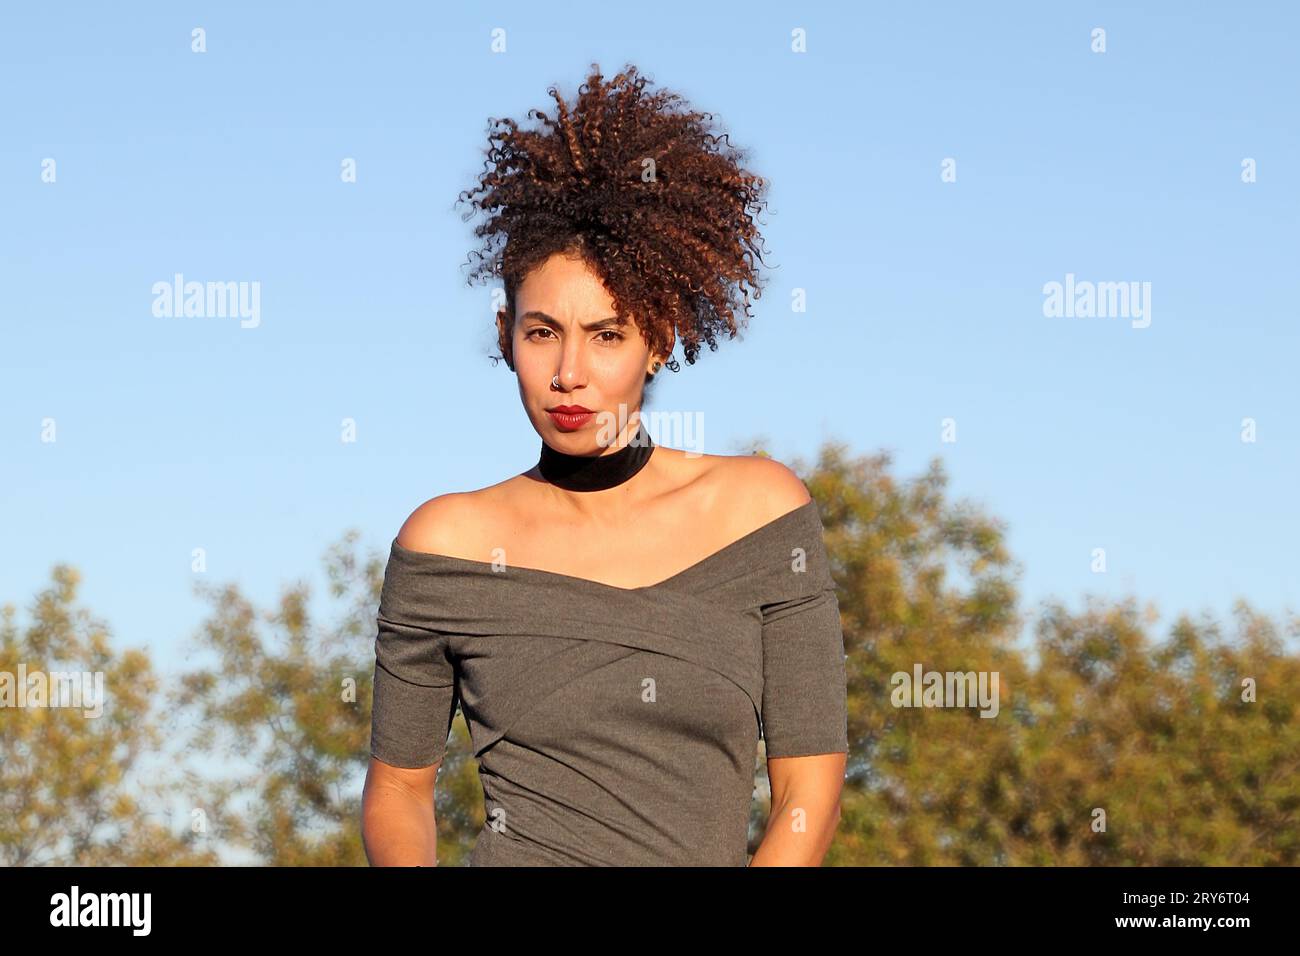 Curly hair woman in brown dress posing with blue sky in background Stock Photo